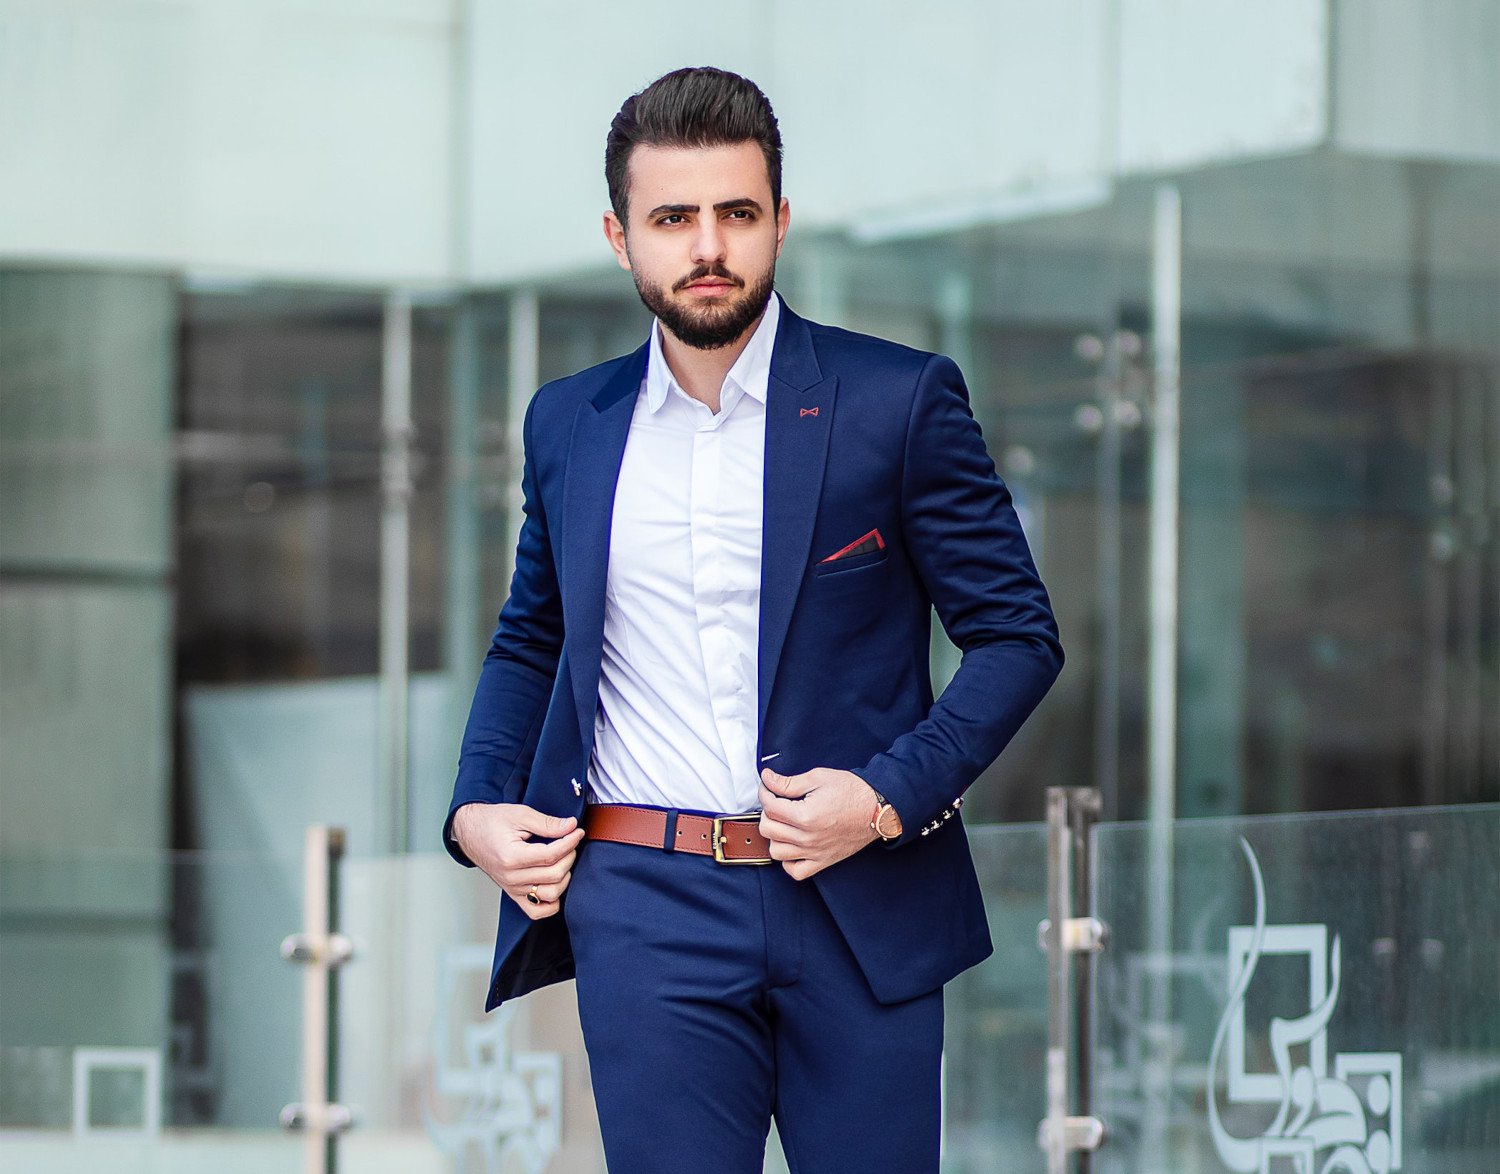 Sport Coat vs. Blazer vs. Suit Jacket: What's the Difference?